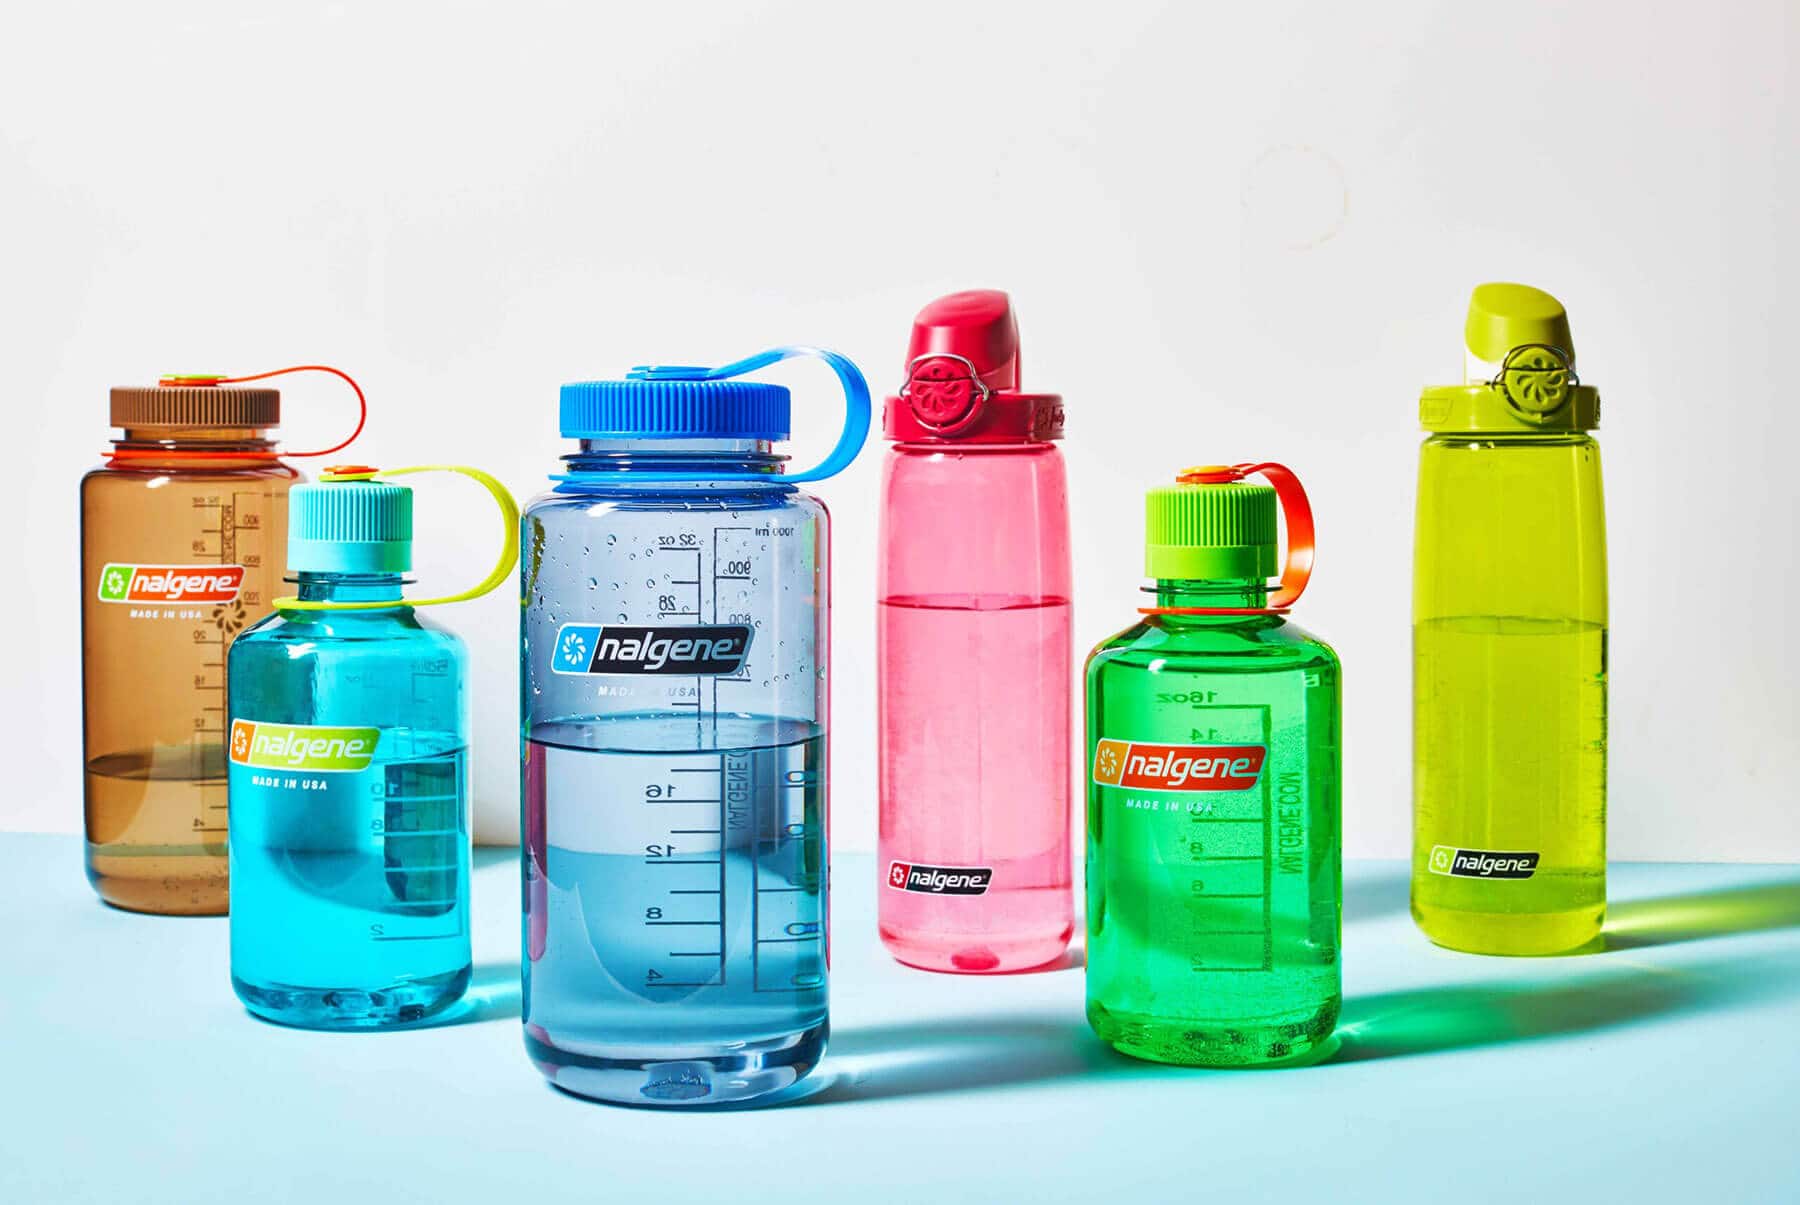 Nalgene Outdoor Fully Converts Manufacturing of Lifestyle Bottles to 50% Certified Recycled Material